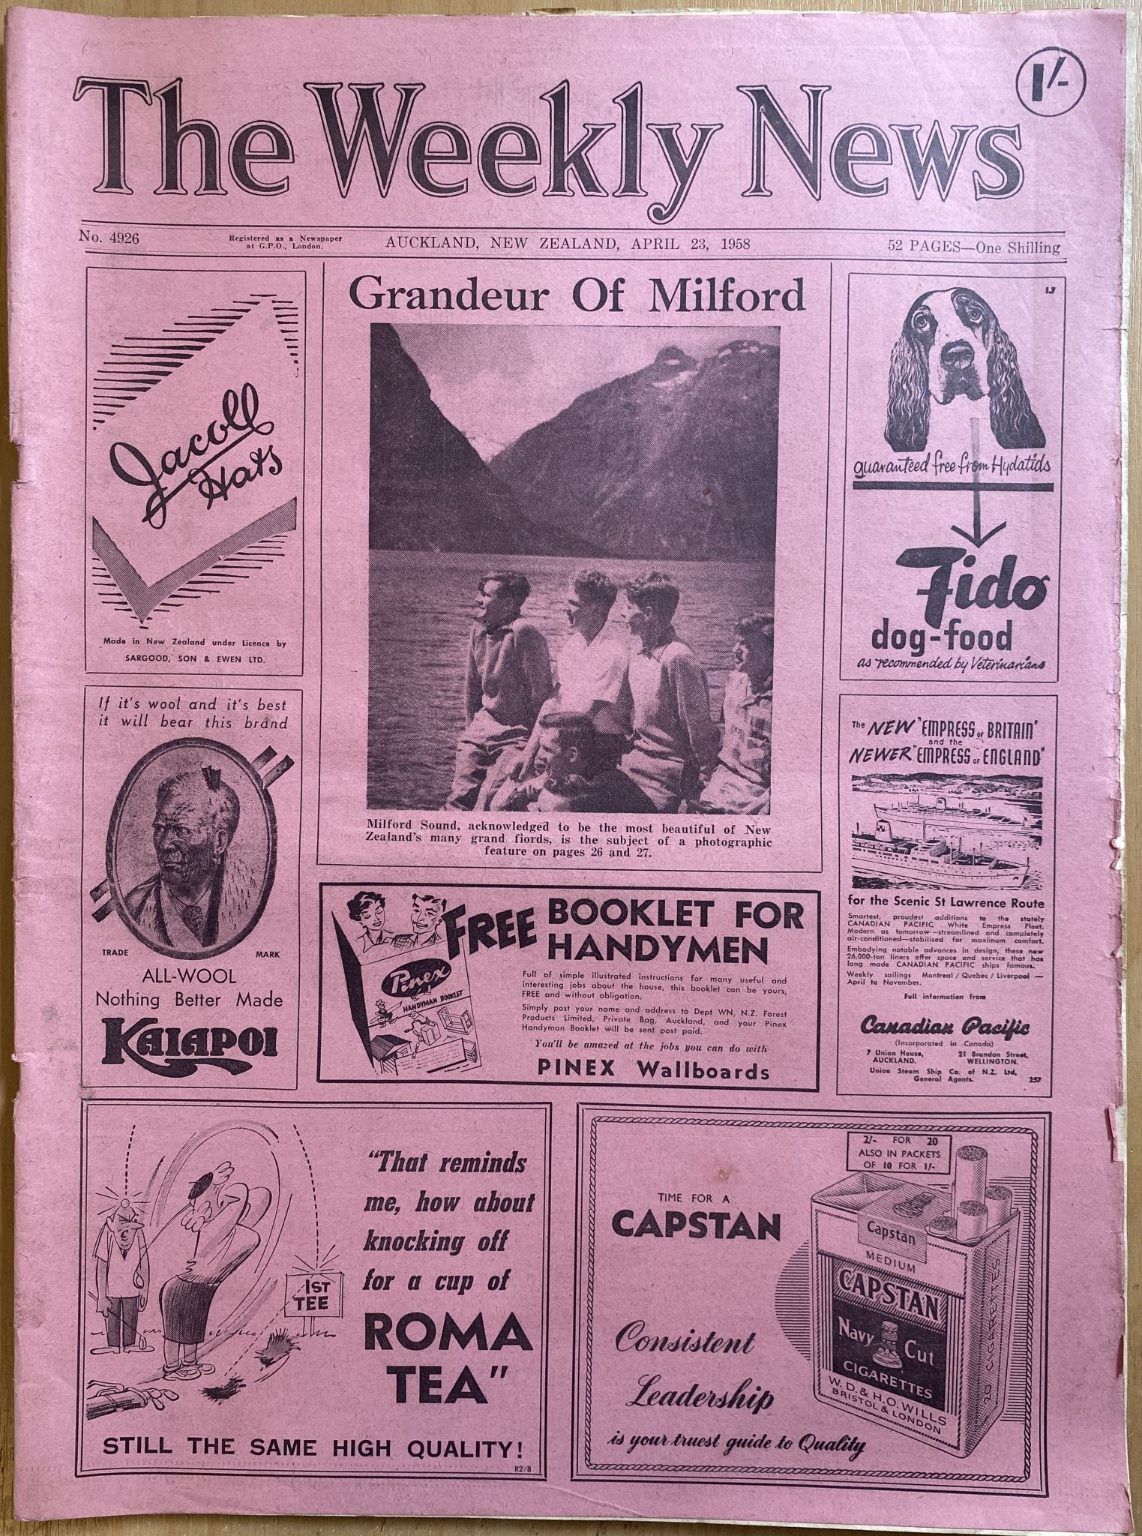 OLD NEWSPAPER: The Weekly News, No. 4926, 23 April 1958